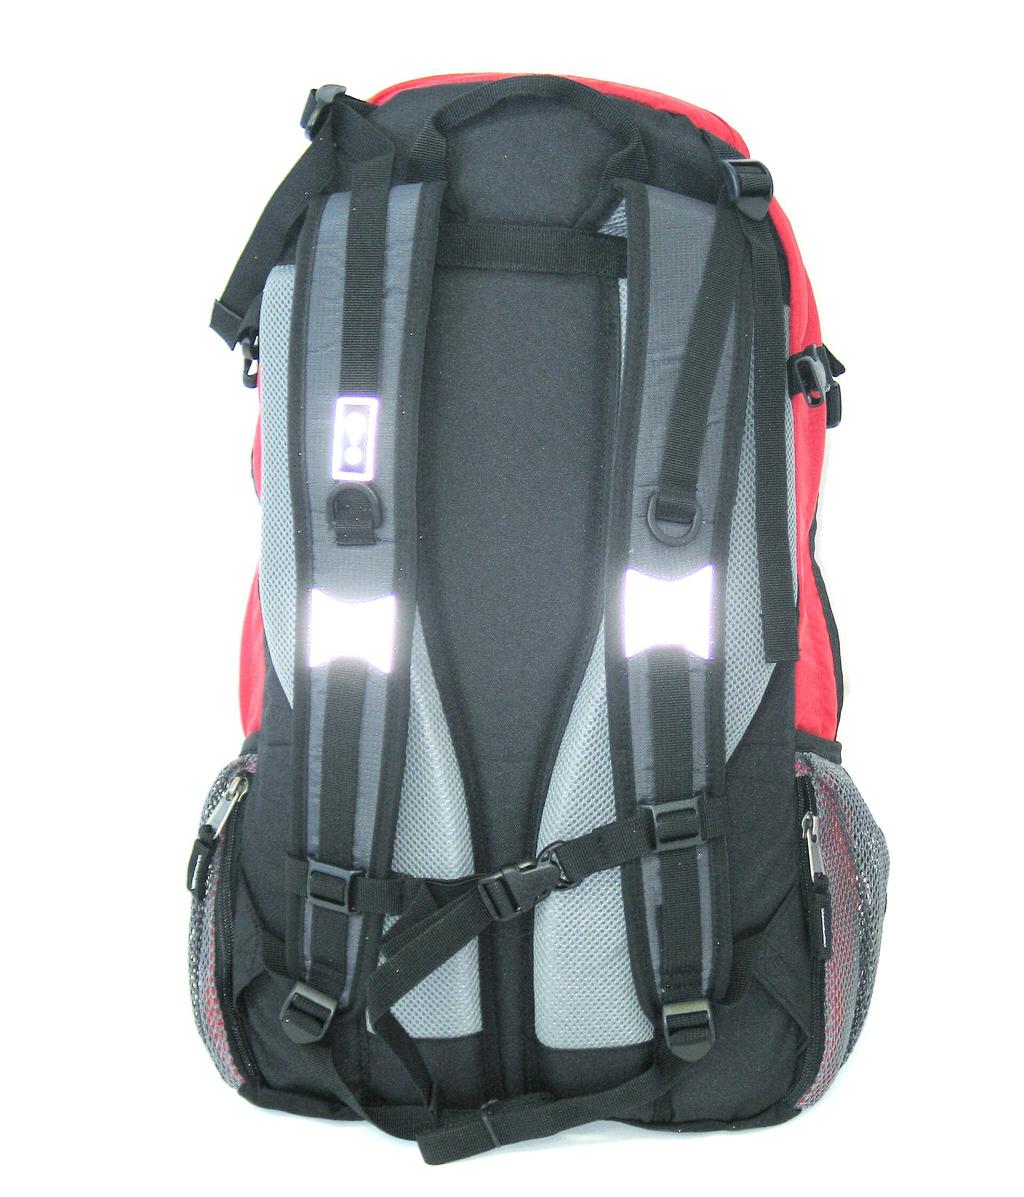 6 DAY PACKS Eye N Stein An all purpose pack that functions equally as well on the trails, streets or classrooms.